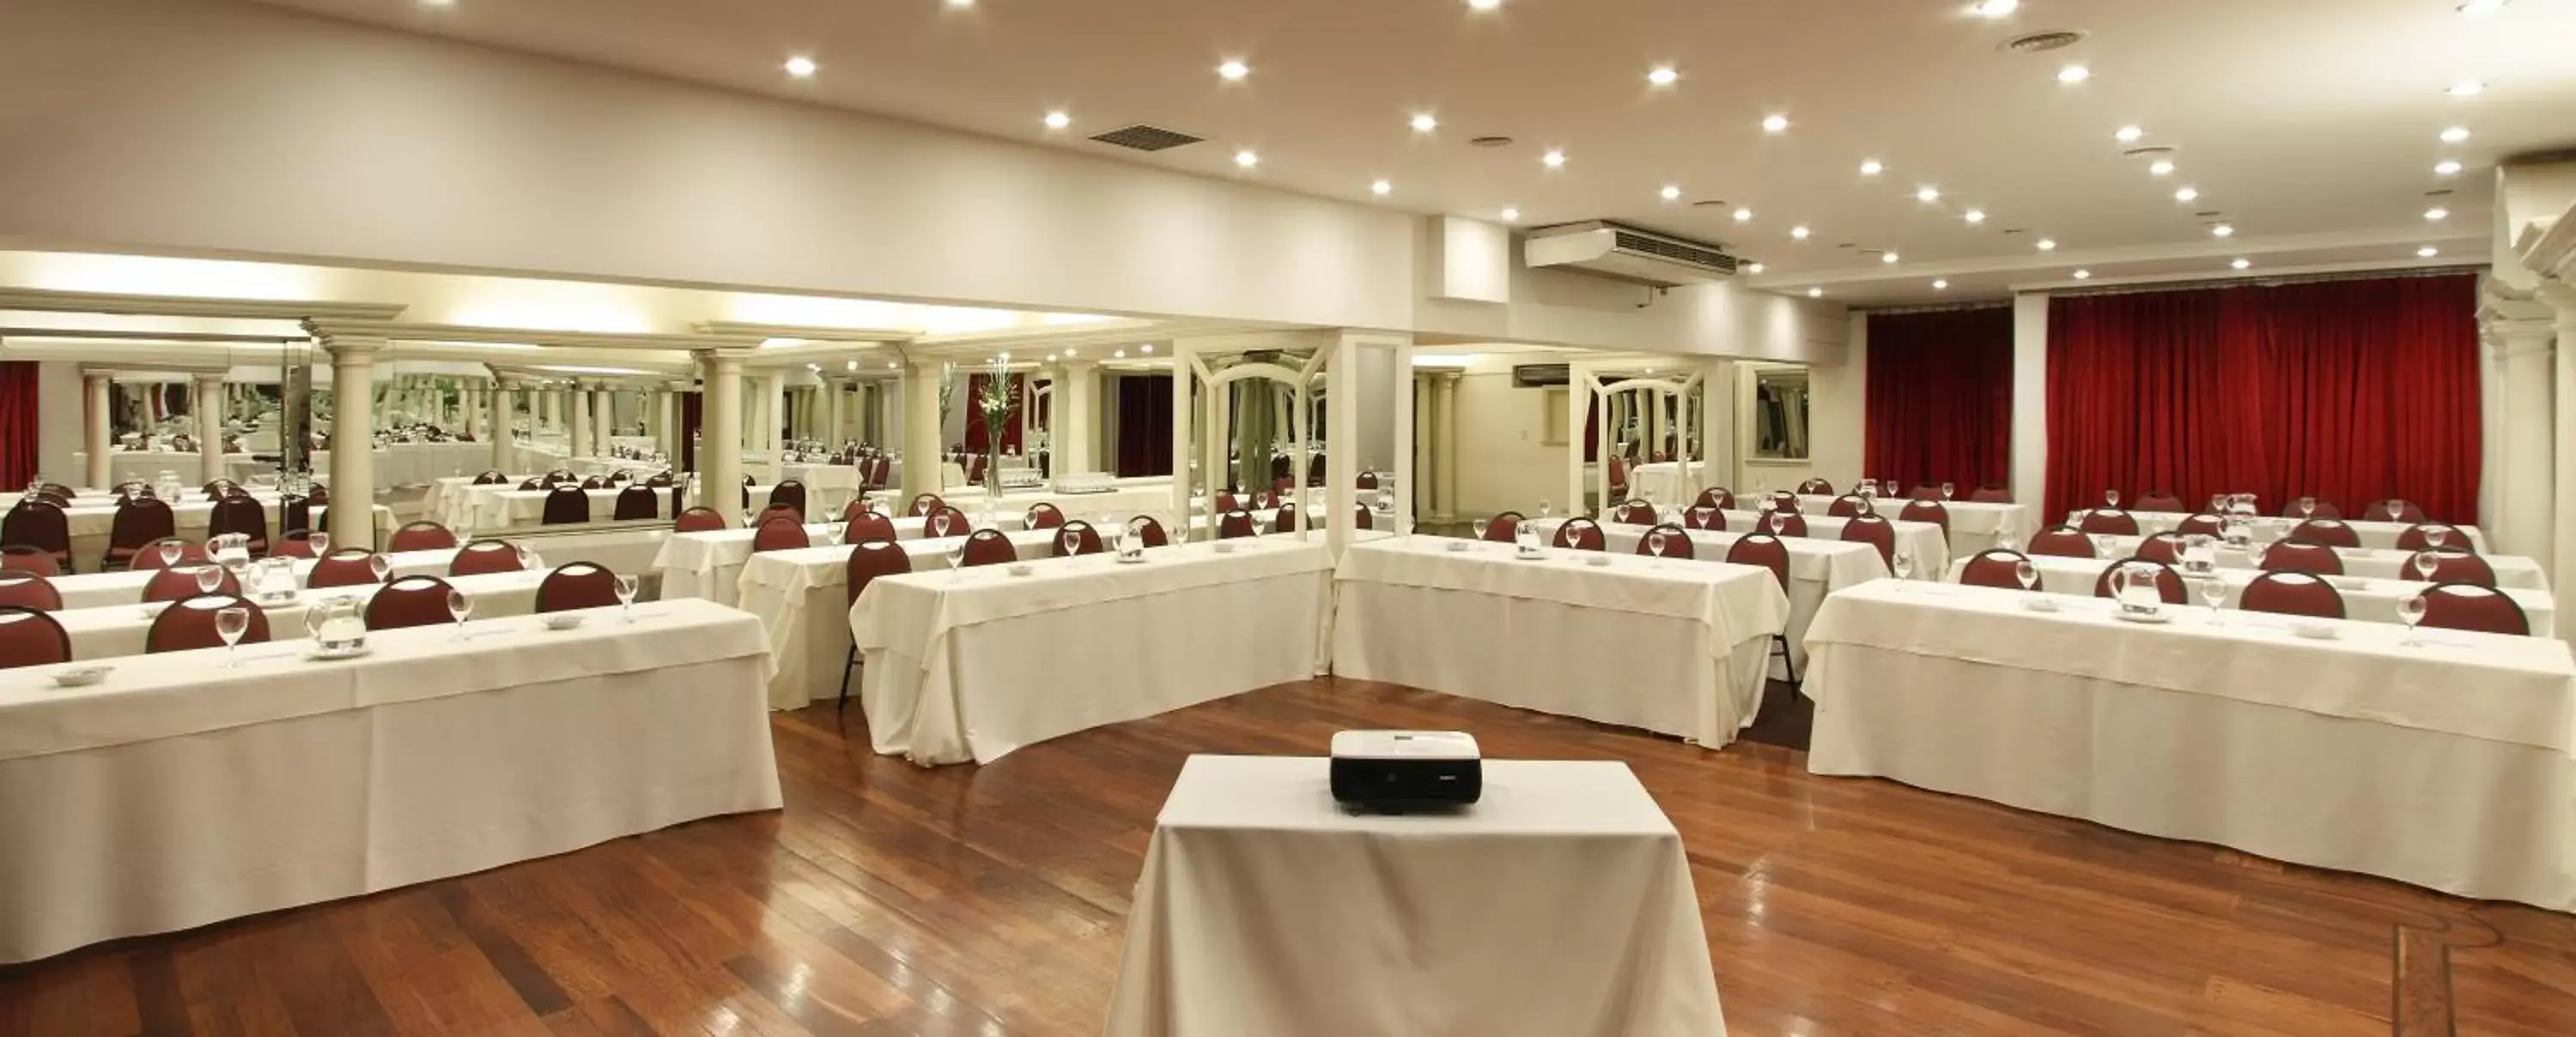 Meeting/conference room in Hotel Presidente Buenos Aires